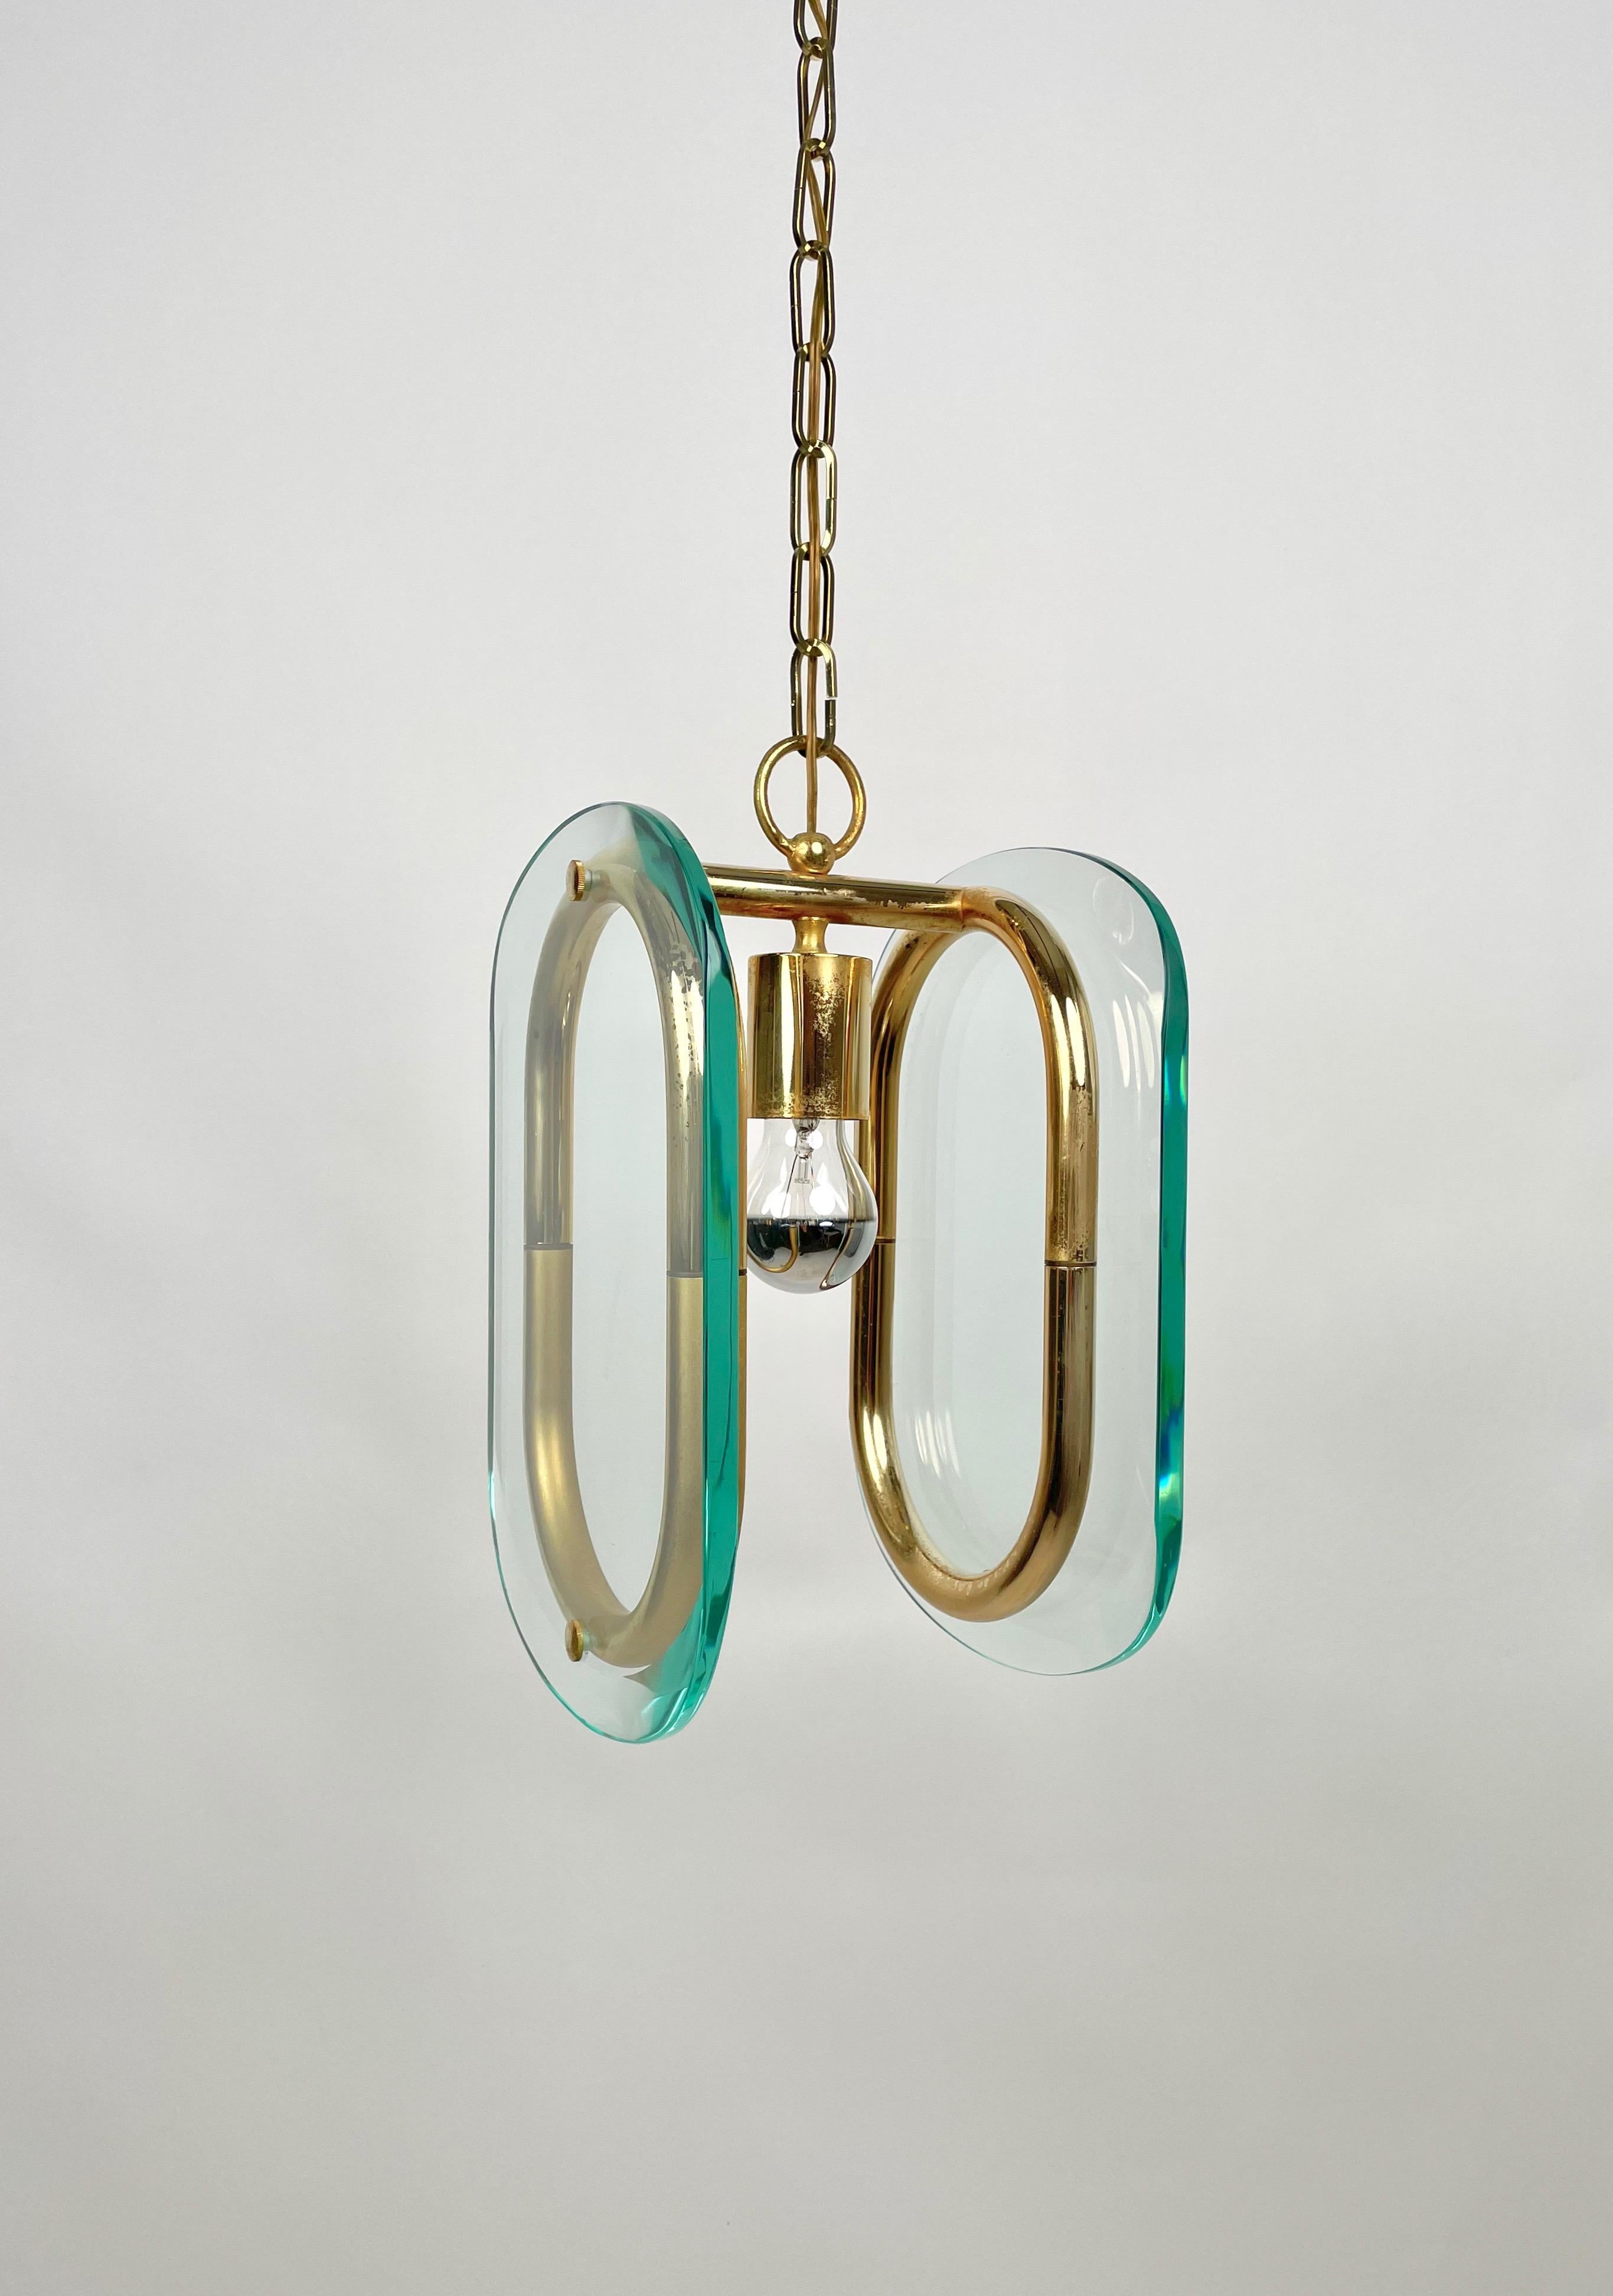 Late 20th Century Brass and Glass Chandelier Fontana Arte Style, Italy, 1970s For Sale